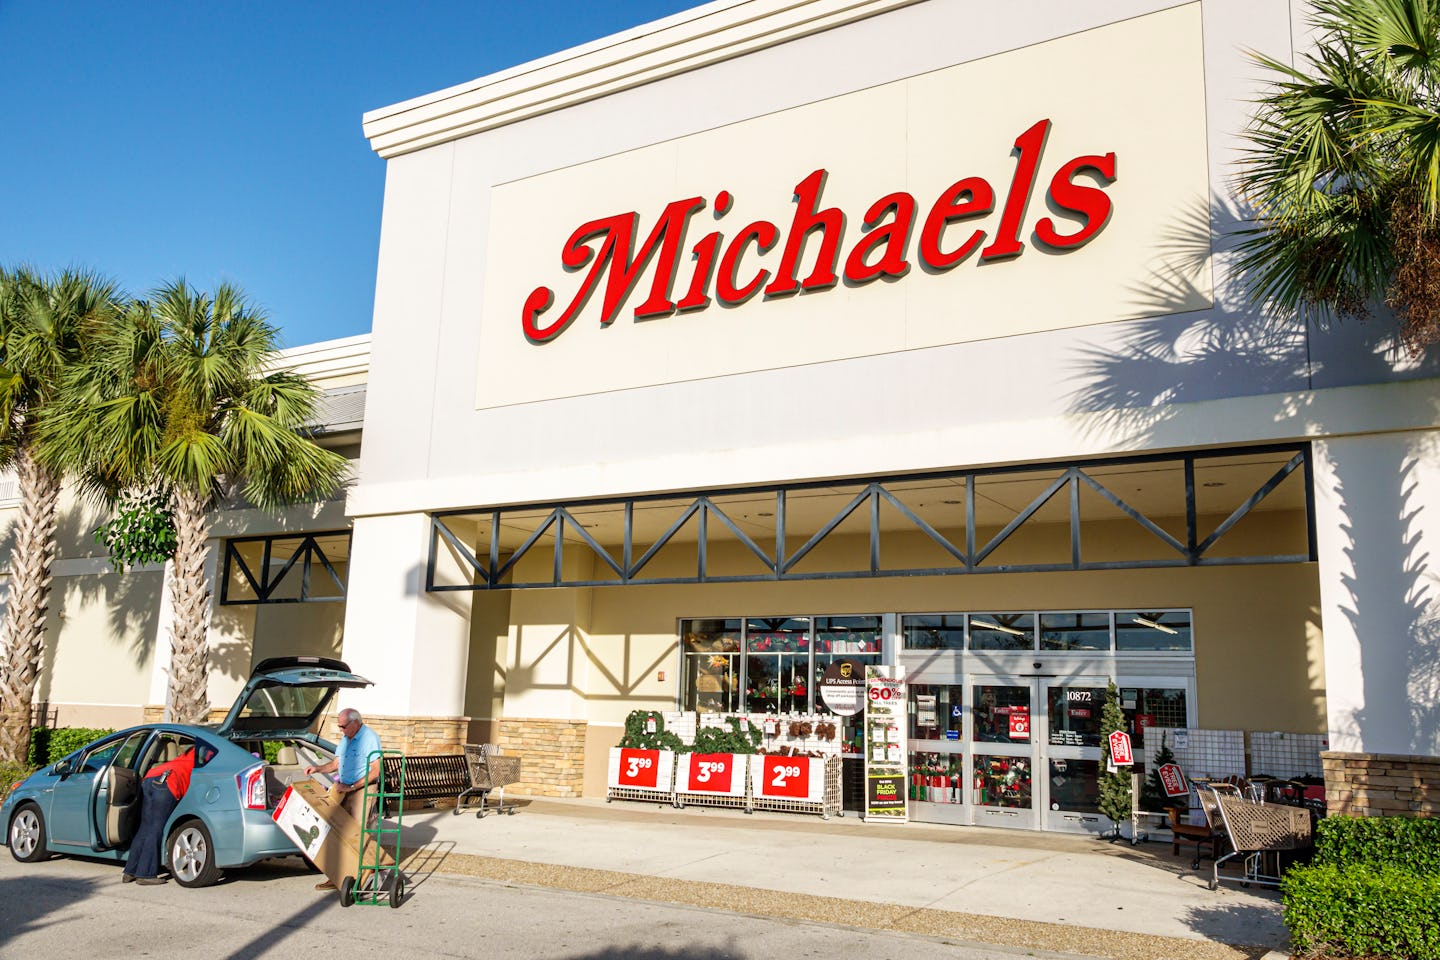 When Does Michaels Put Out Christmas & Holiday 2021 Merchandise?